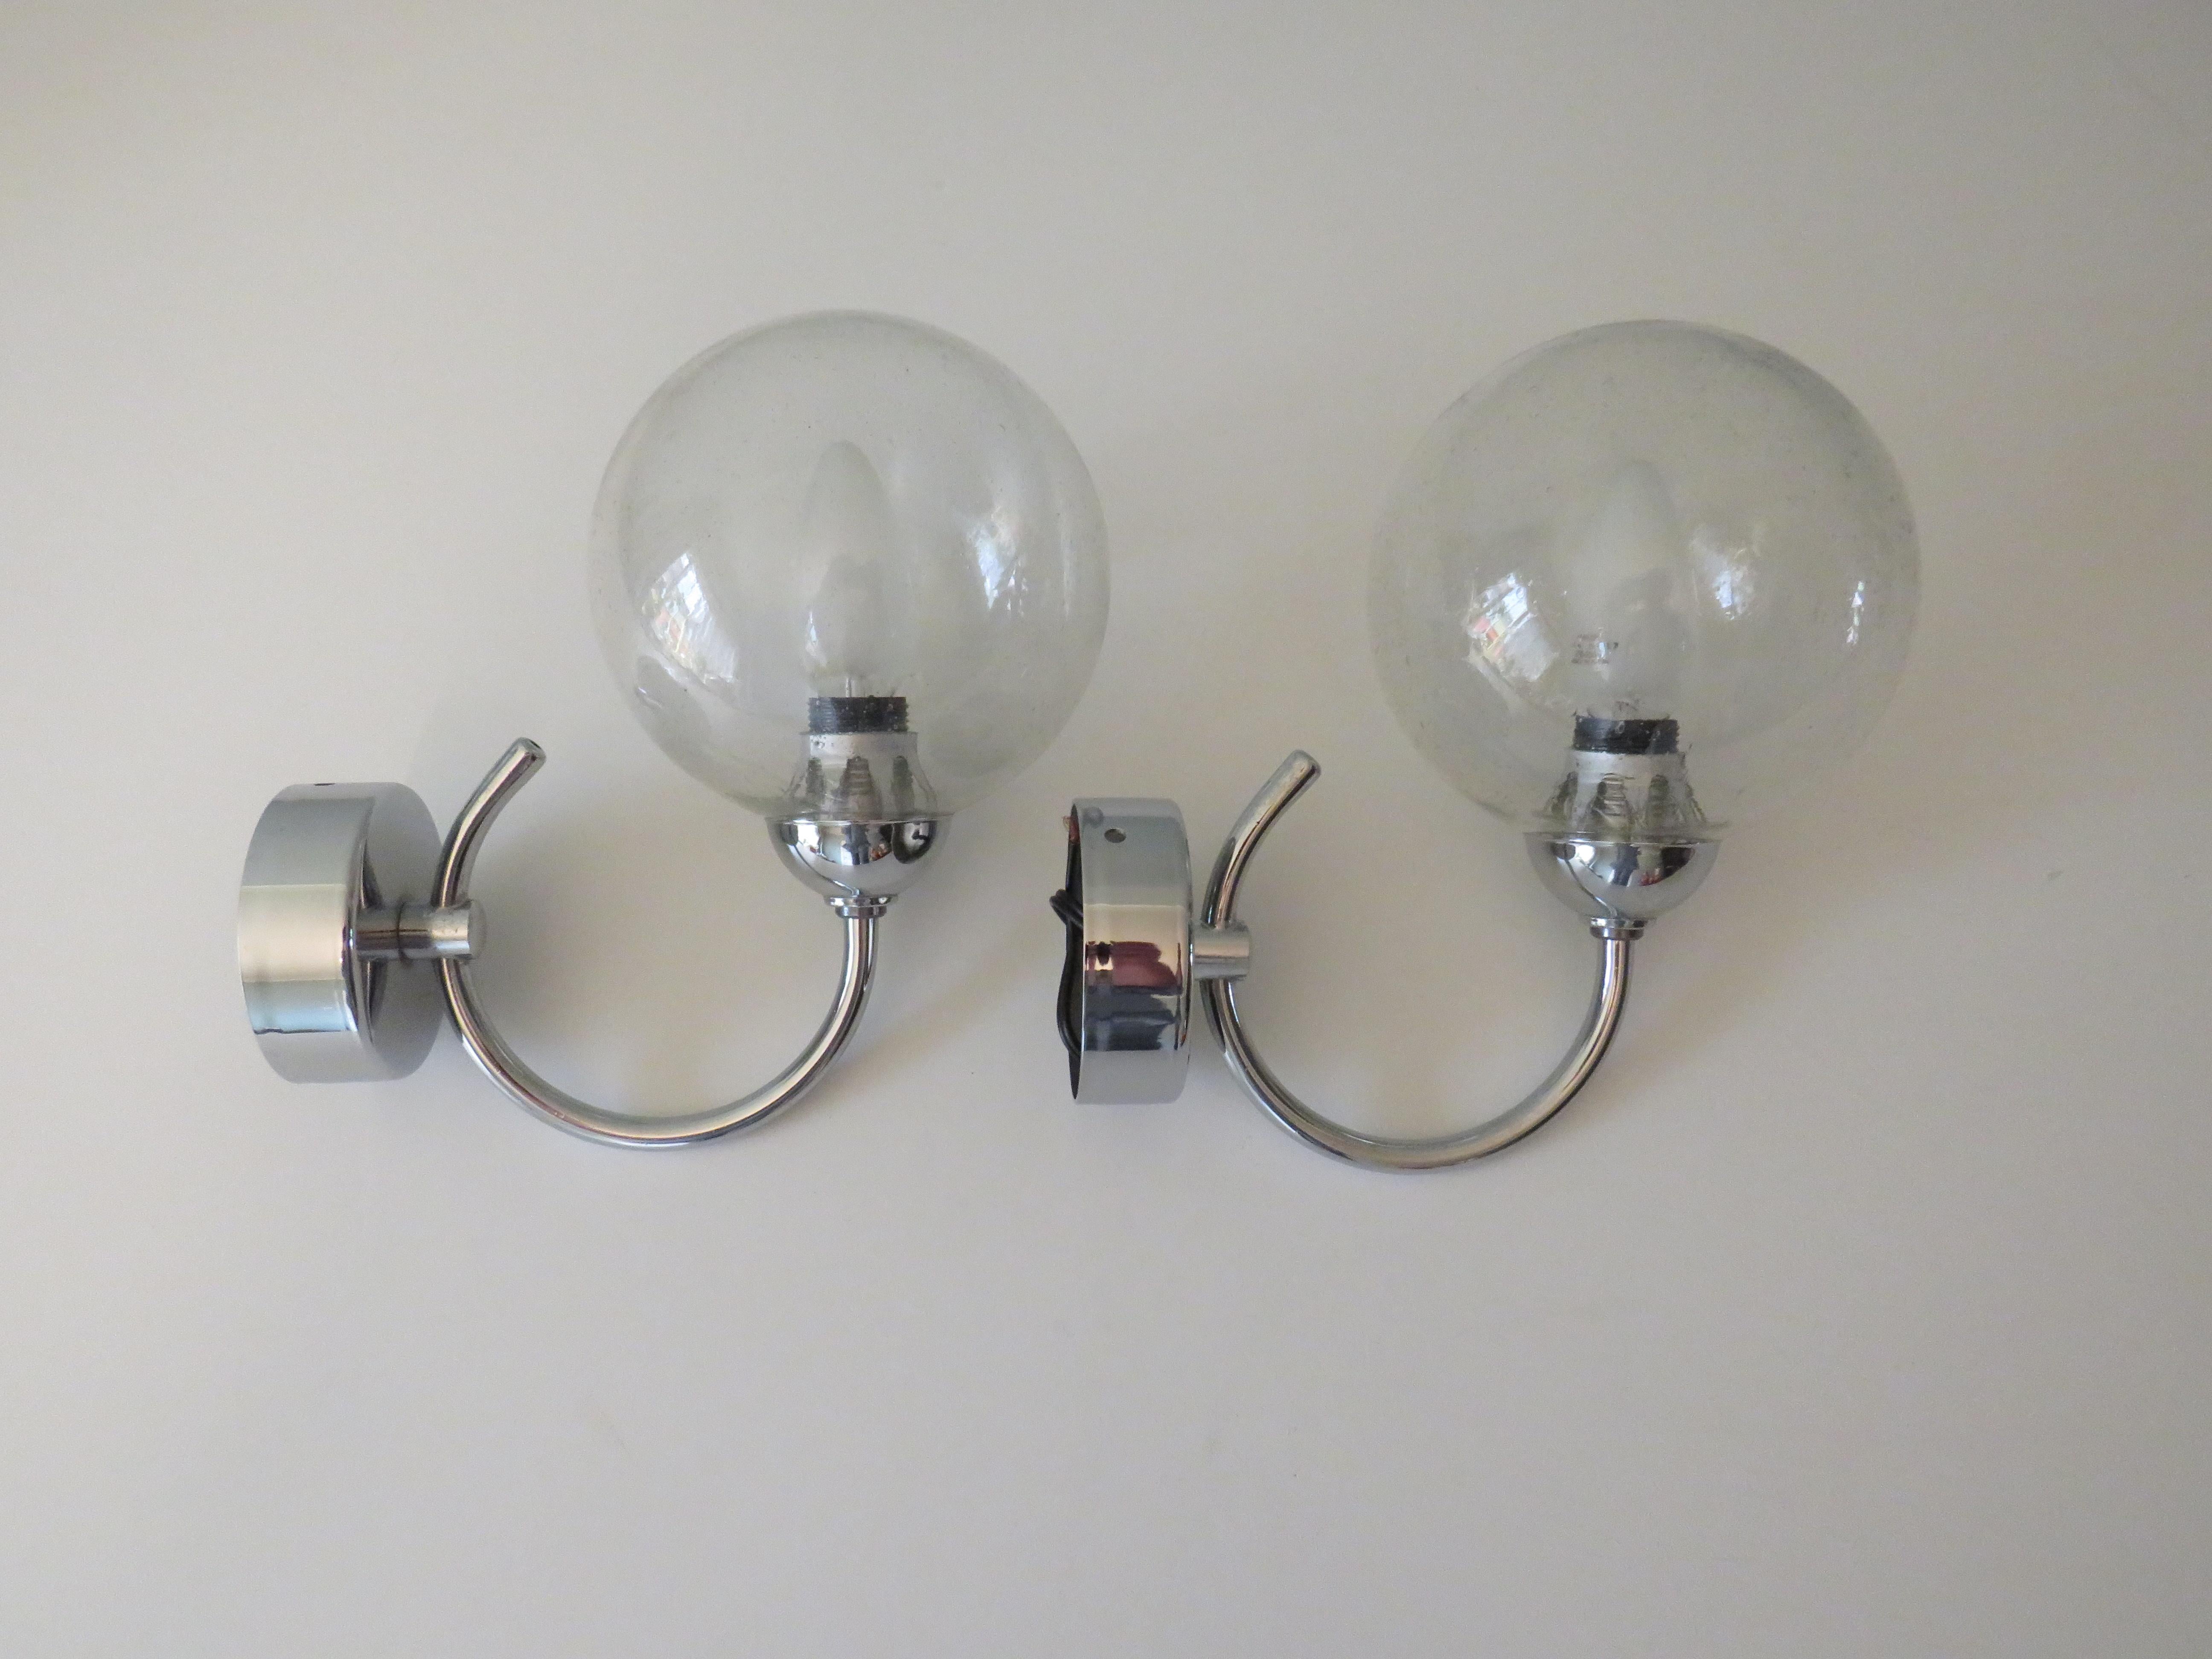 The lights have a chrome frame and a glass sphere with air bubbles.
They are both equipped with 1 E 14 fitting and a suspension eye in the fixture.
H 24 cm, W 13 and D 21 cm
They are both in good and working condition.
Price is for the set.